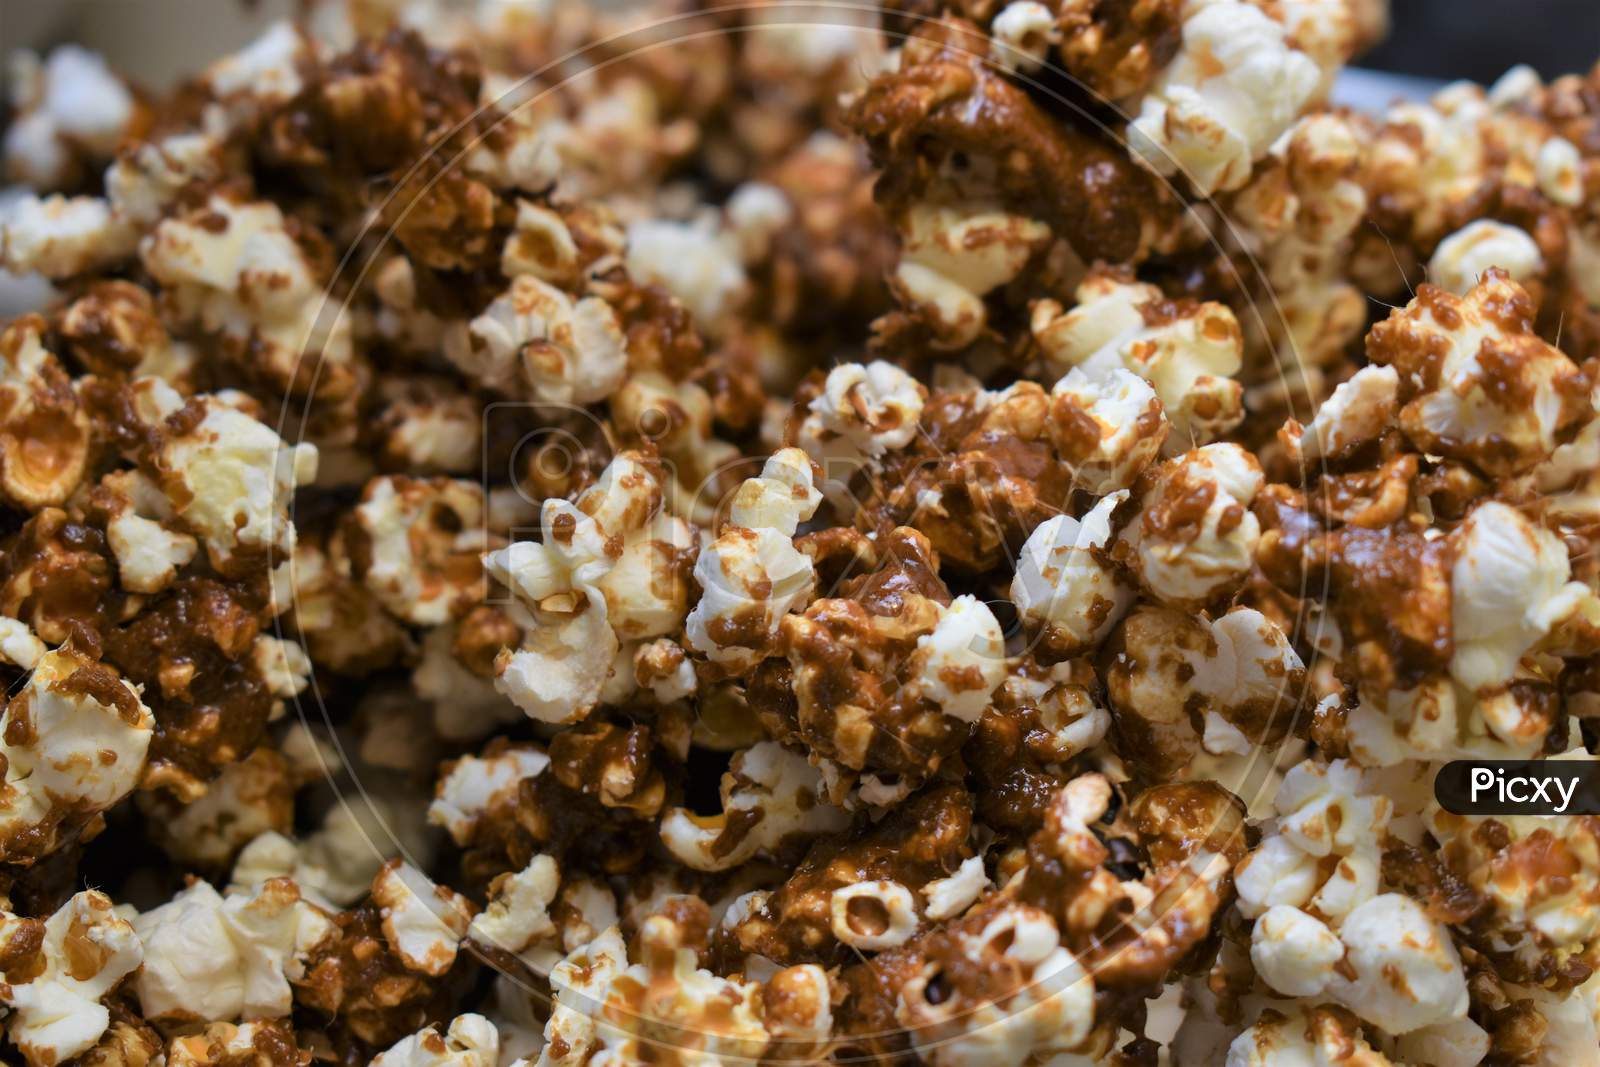 Home Made Caramel Popcorn Closeup Shot In Box .Tasty And Delicious Popcorn